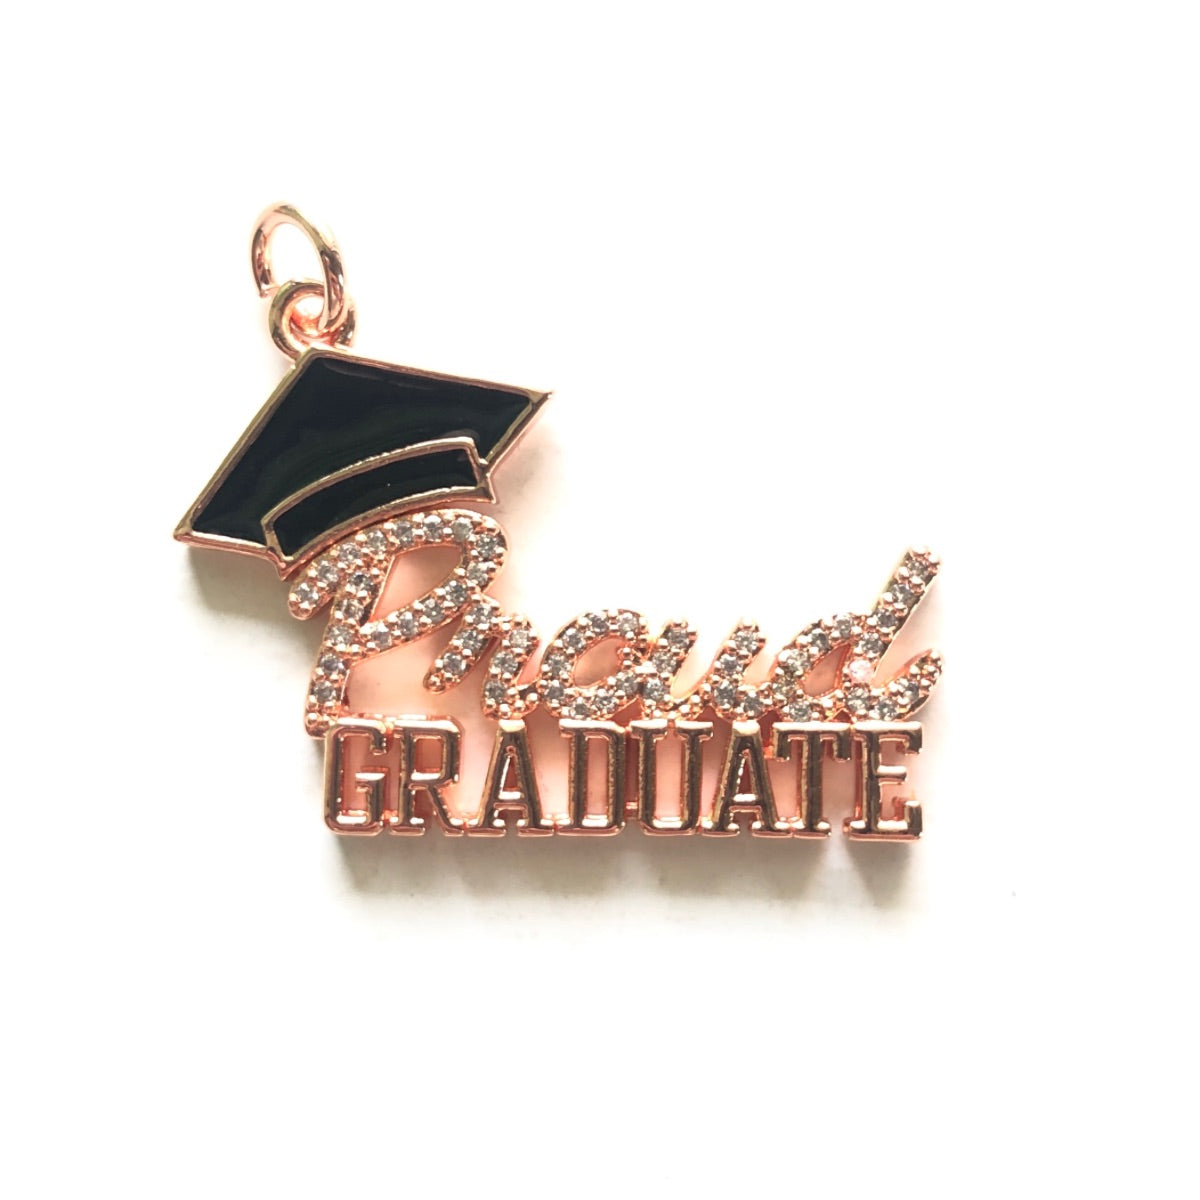 10pcs/lot 34.5*24.5mm CZ Pave Proud Graduate Word Charms for Graduation Rose Gold CZ Paved Charms Graduation New Charms Arrivals Words & Quotes Charms Beads Beyond